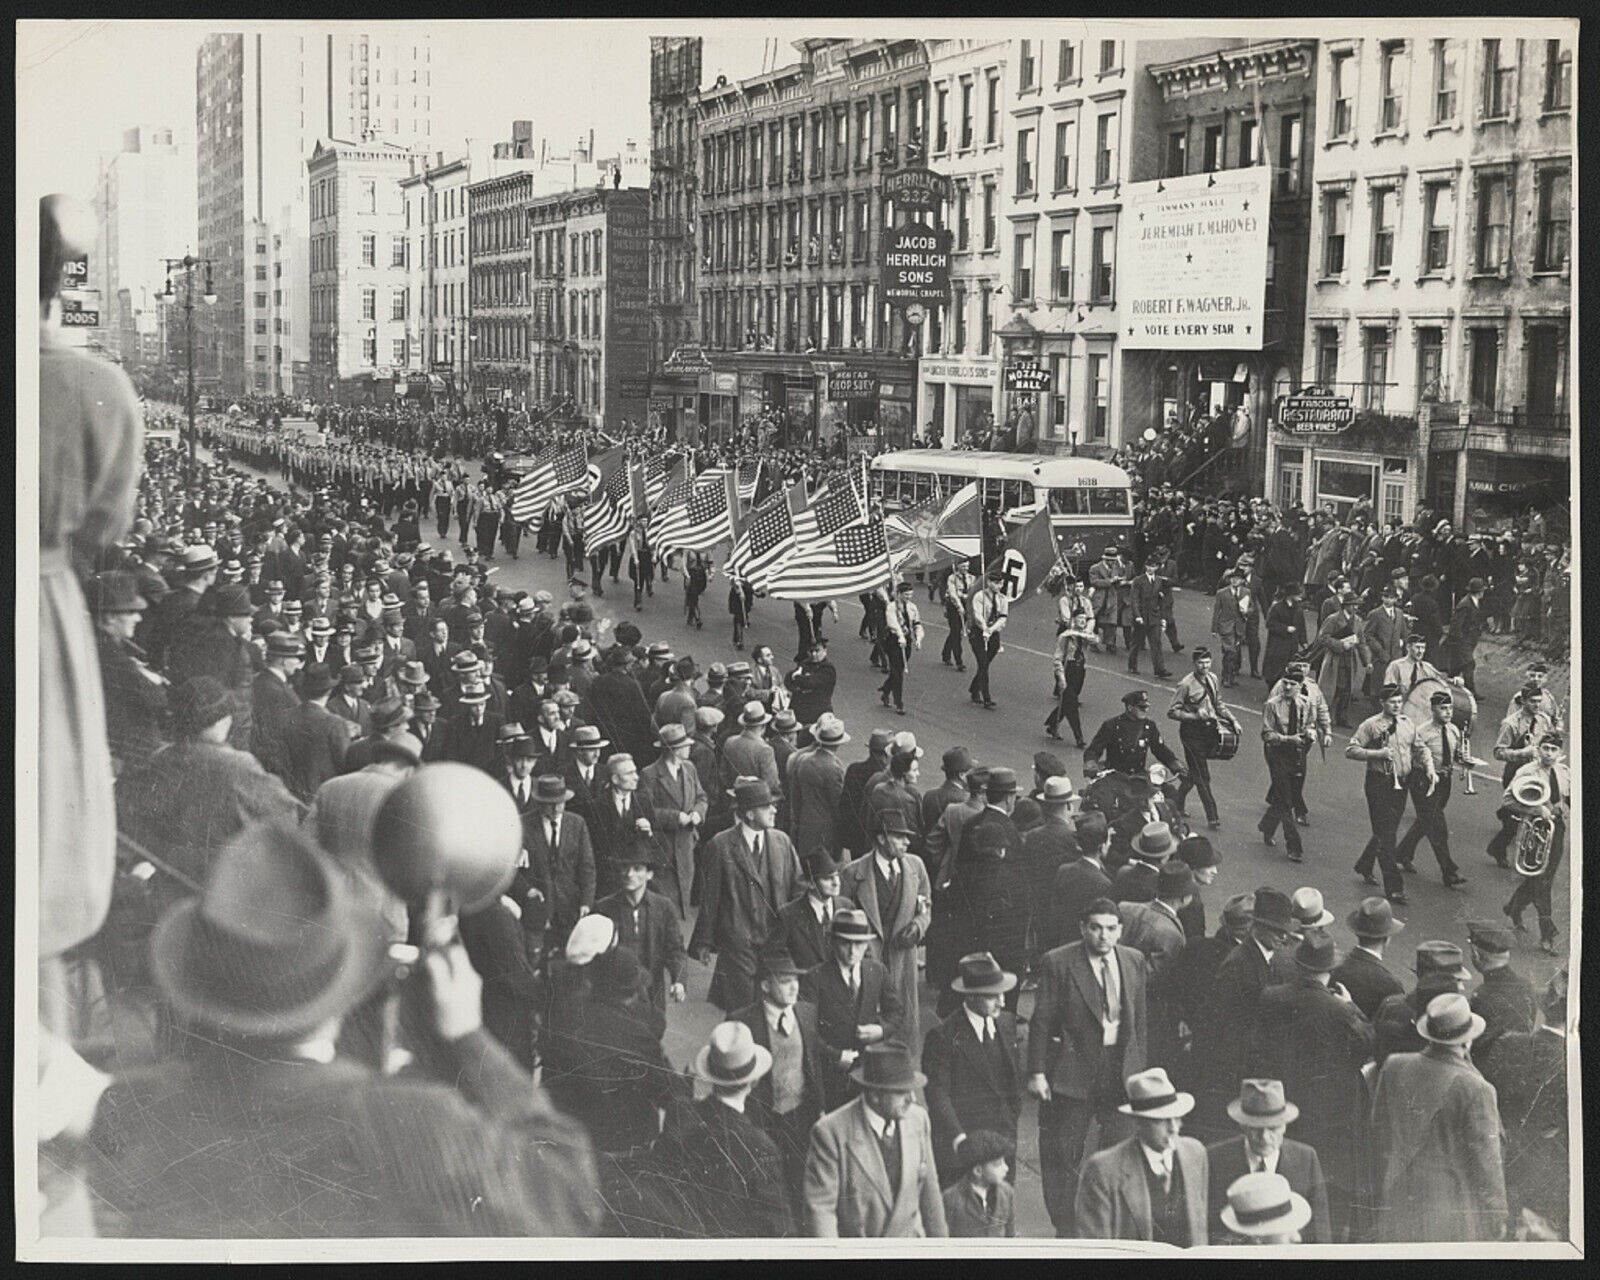 8X10 Photo 1930s German American Band parade in NYC on E 86th St. Oct. 30, 1937 